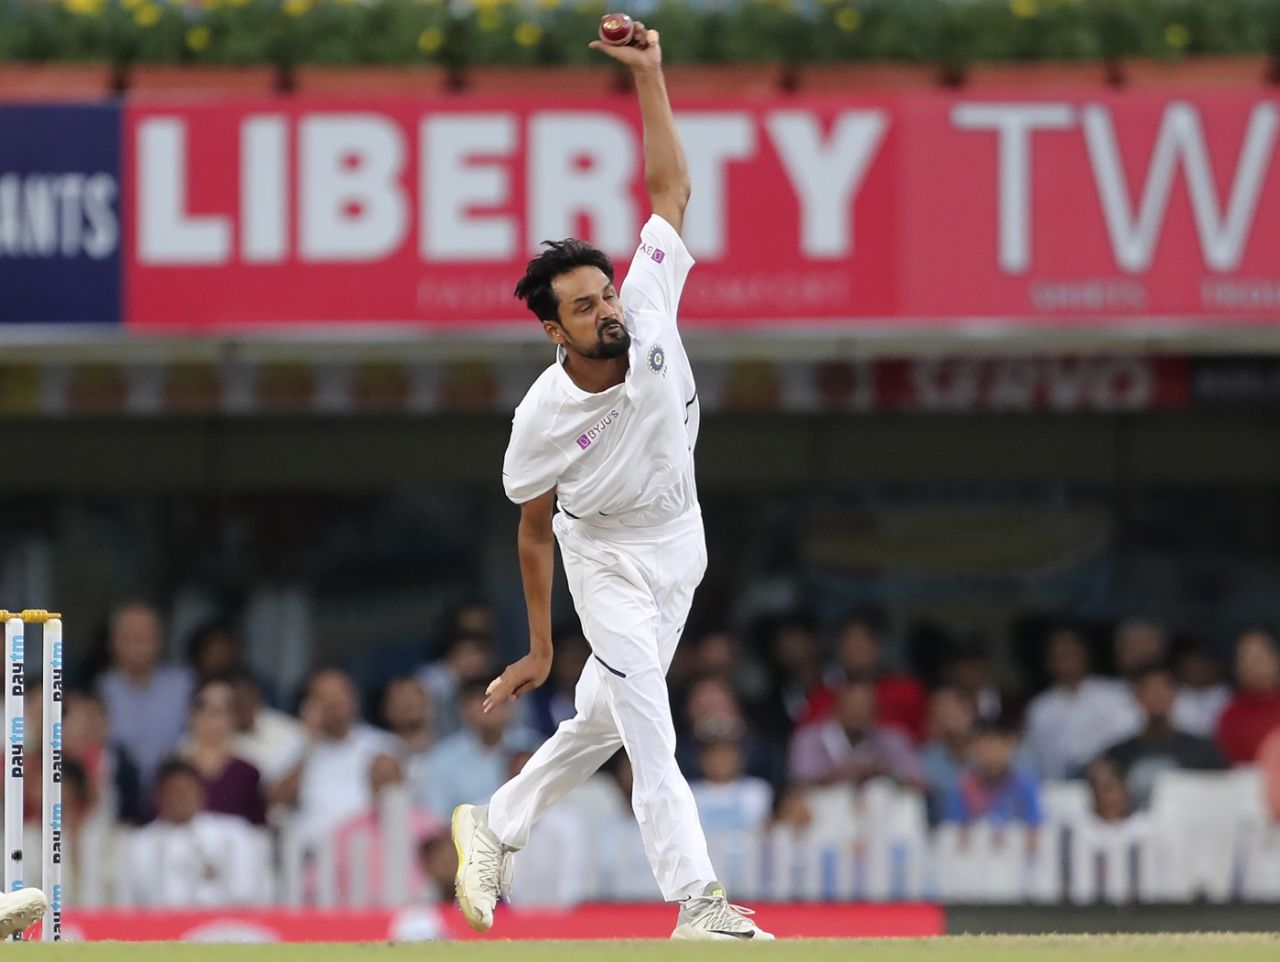 Shahbaz Nadeem bowls, India v South Africa, 3rd Test, Ranchi, 2nd day, October 20, 2019